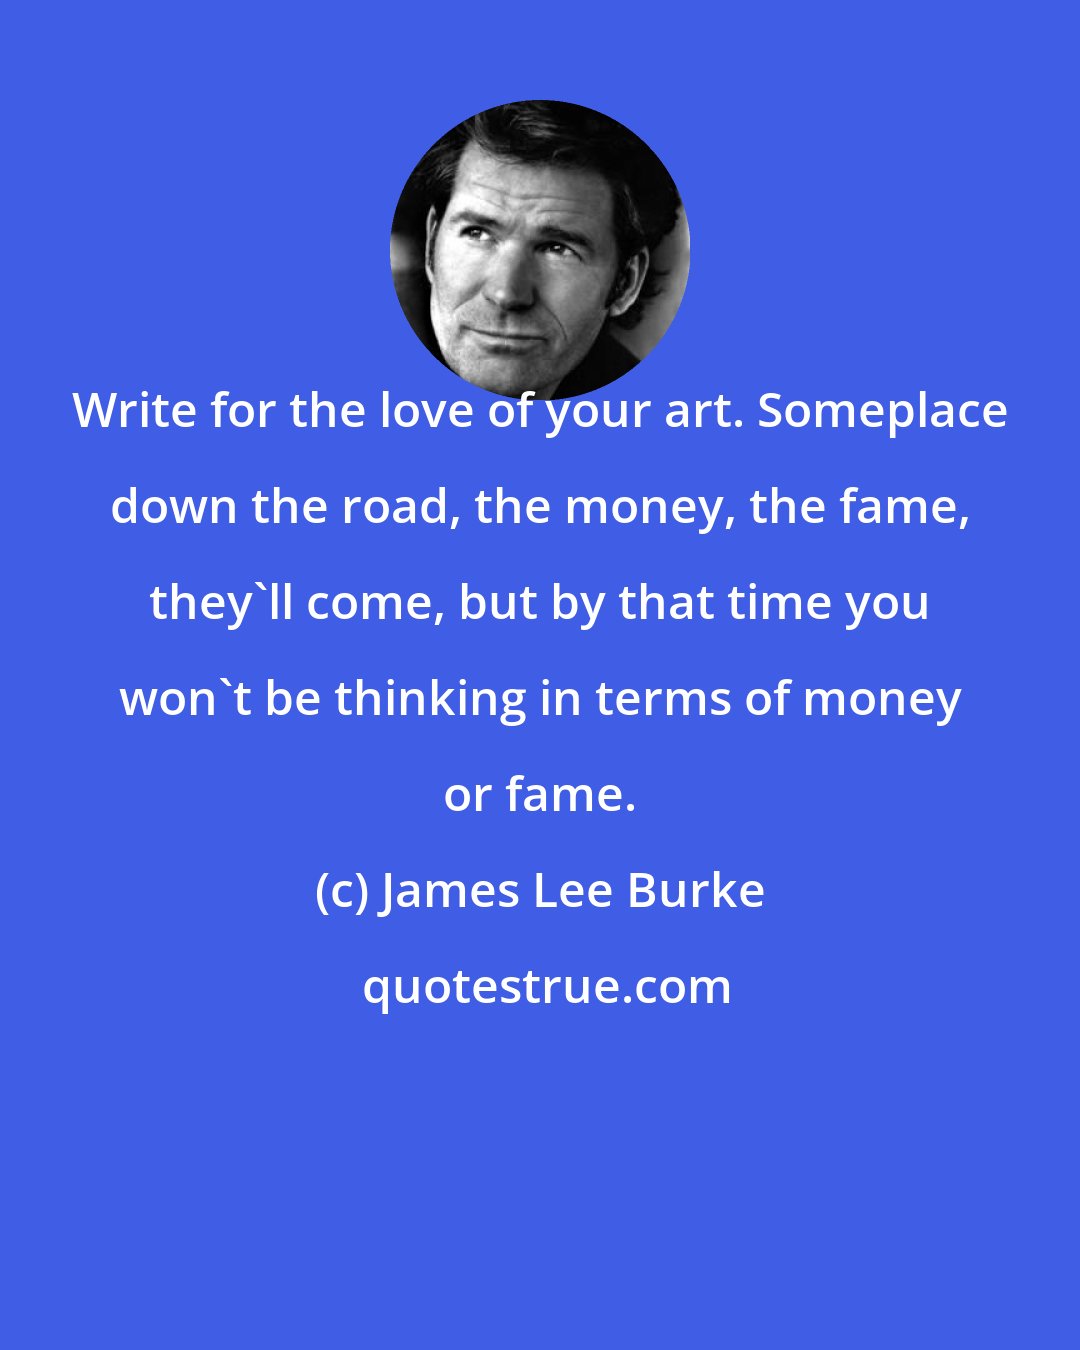 James Lee Burke: Write for the love of your art. Someplace down the road, the money, the fame, they'll come, but by that time you won't be thinking in terms of money or fame.